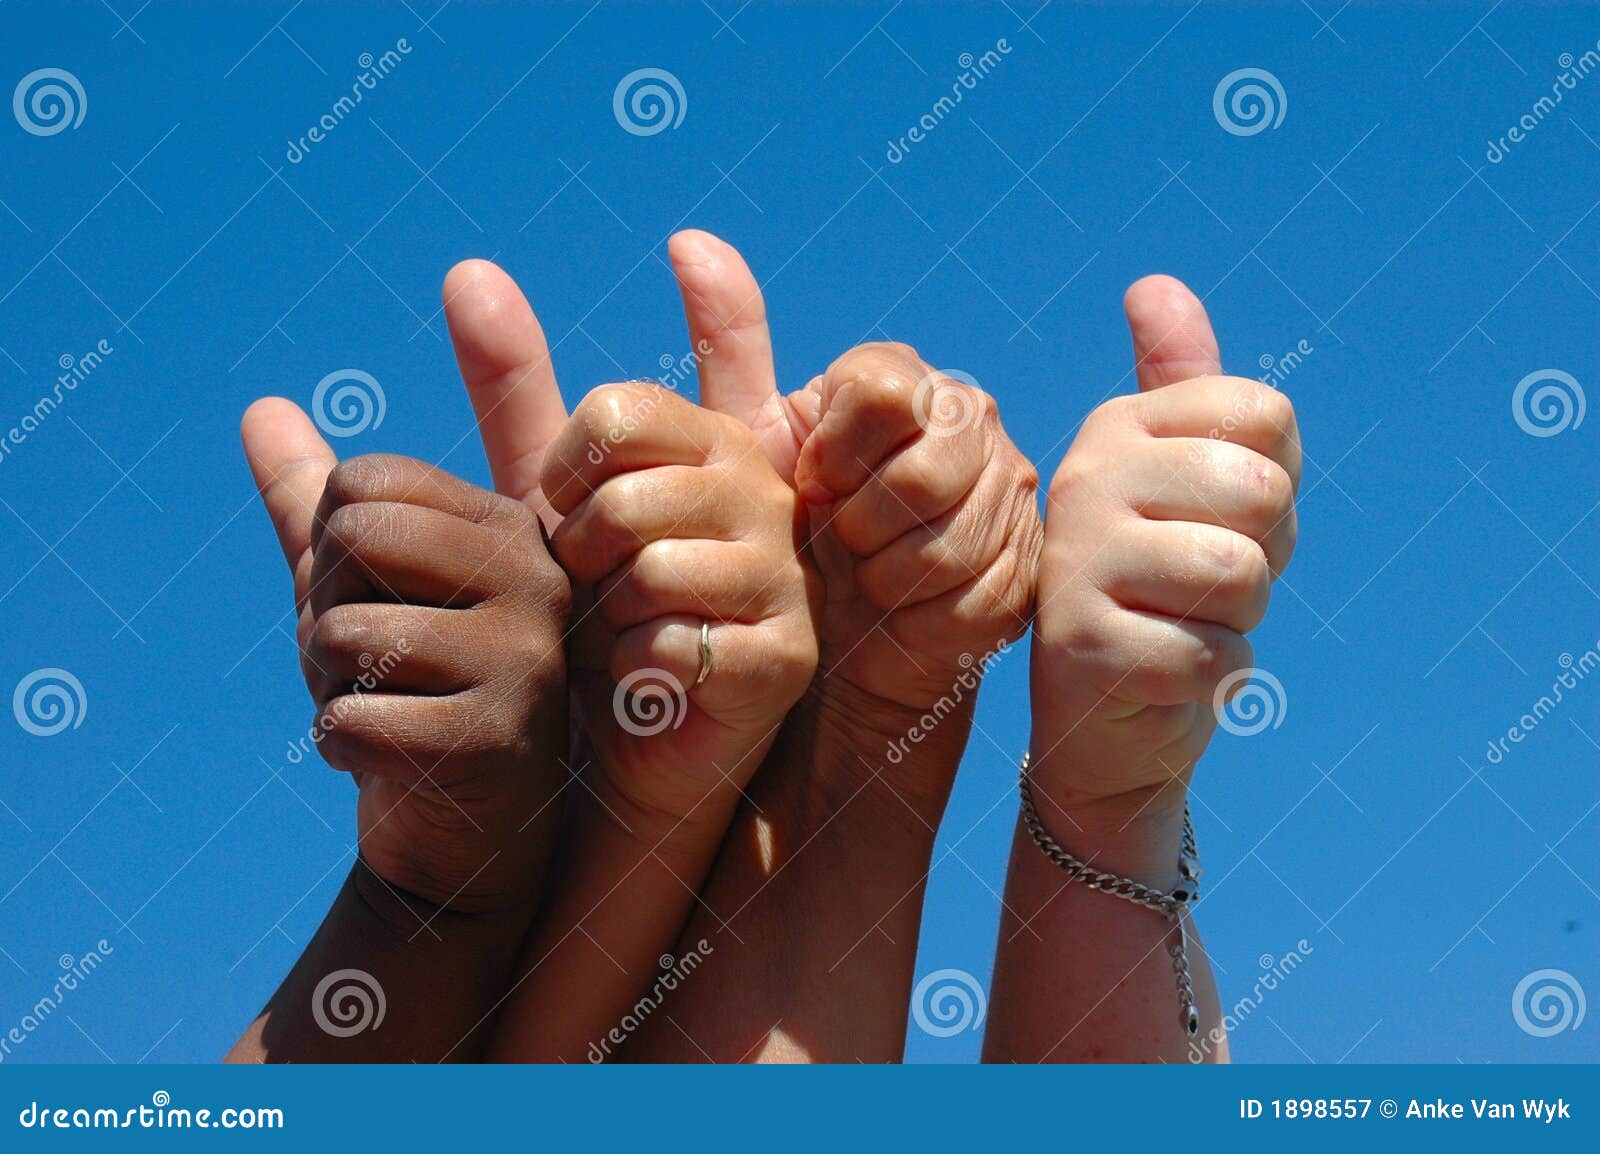 All thumbs up stock image. Image of coloured, freedom - 1898557